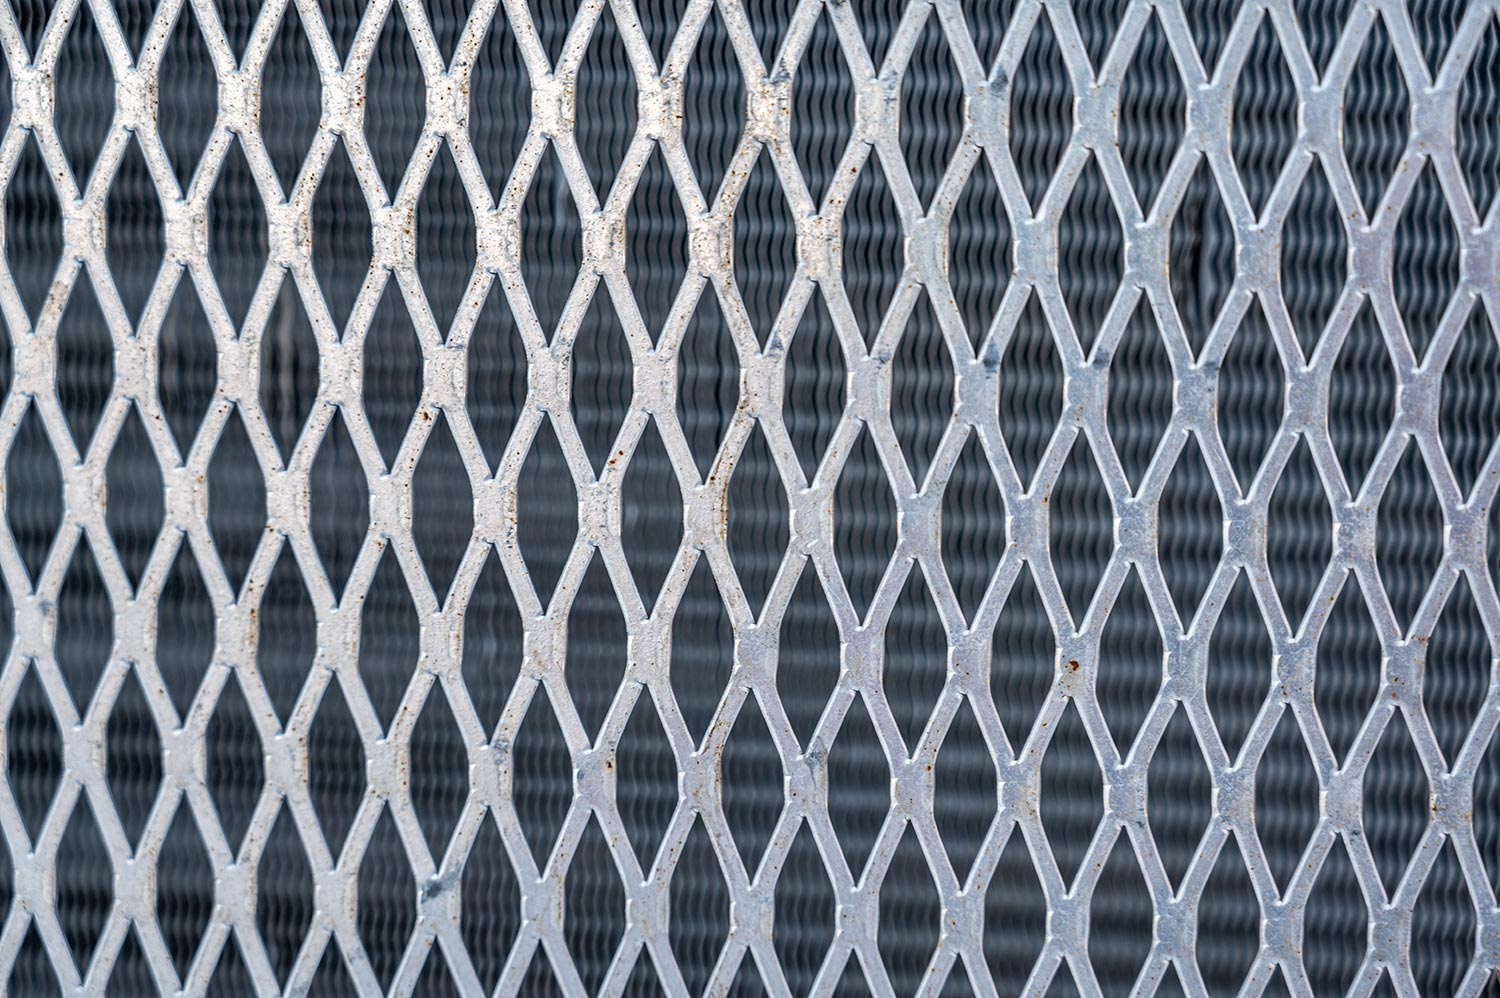 Metal screen and heat exchanging fins of a air conditioner